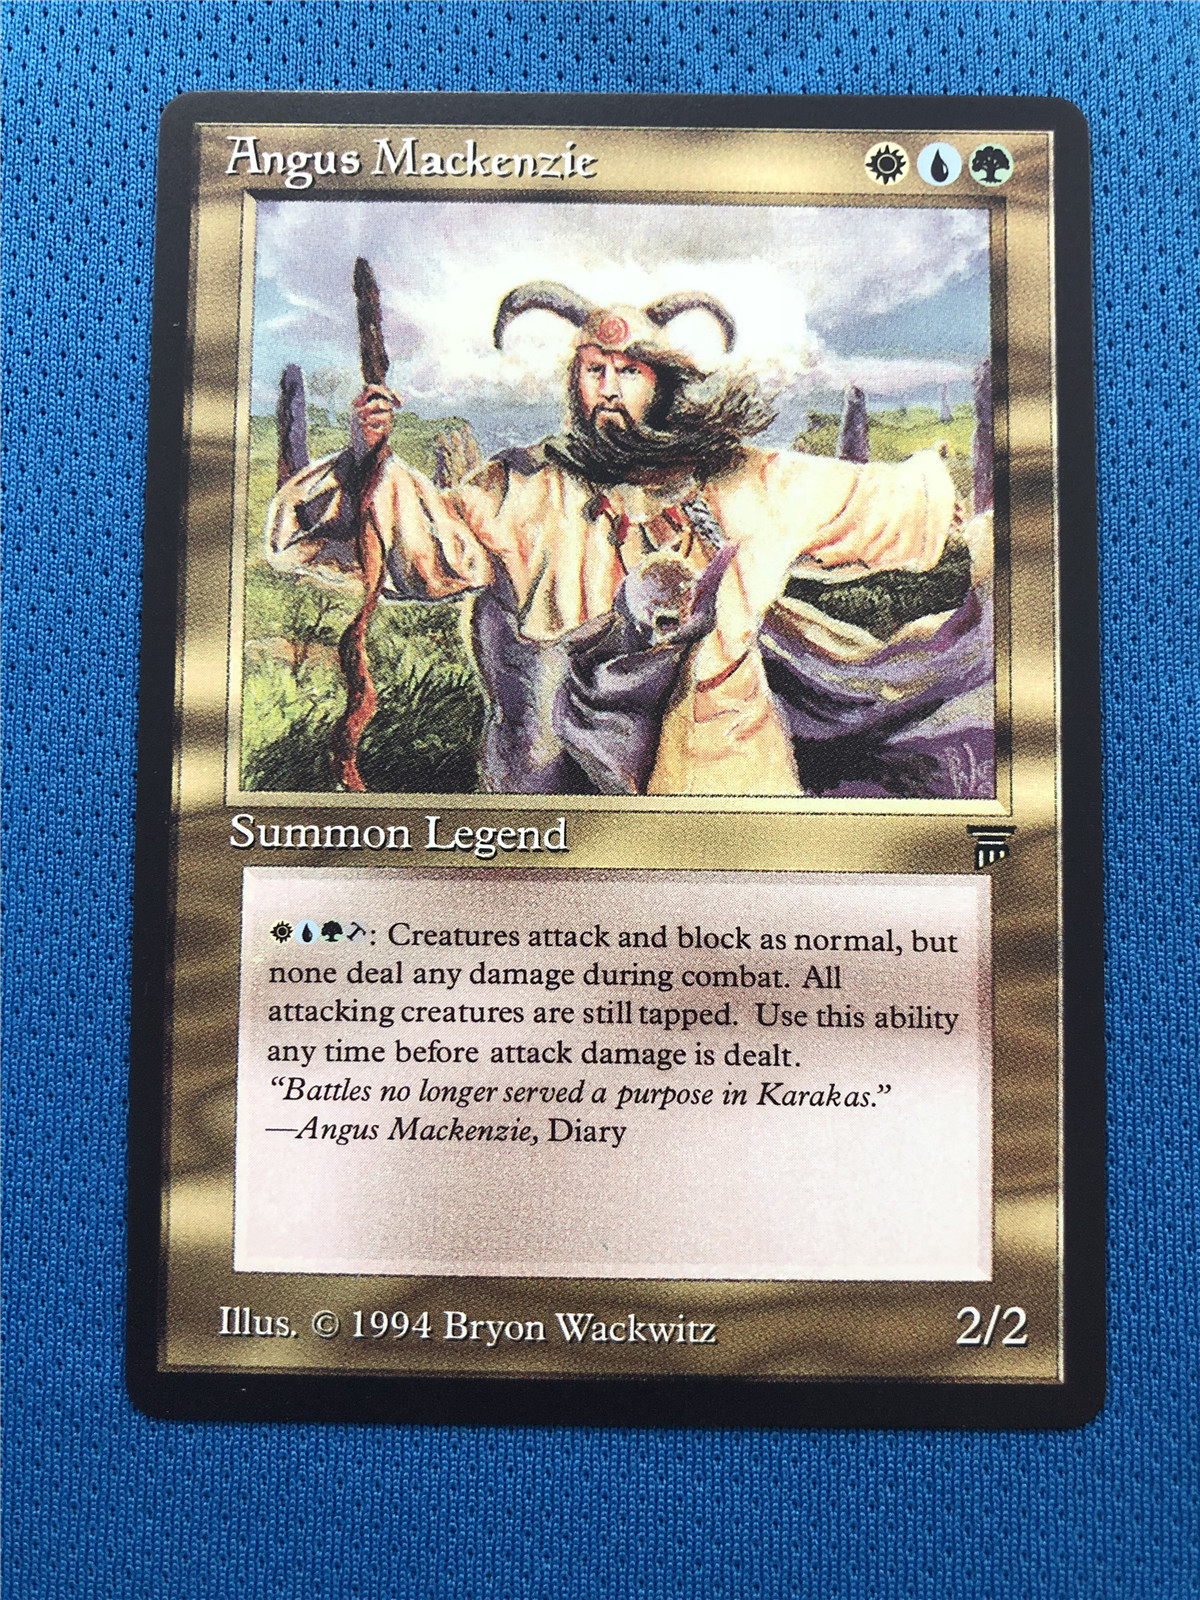 Farewell #365 NEO foil magic the gathering proxy mtg cards Top Quality –  Rylease MTG Proxy